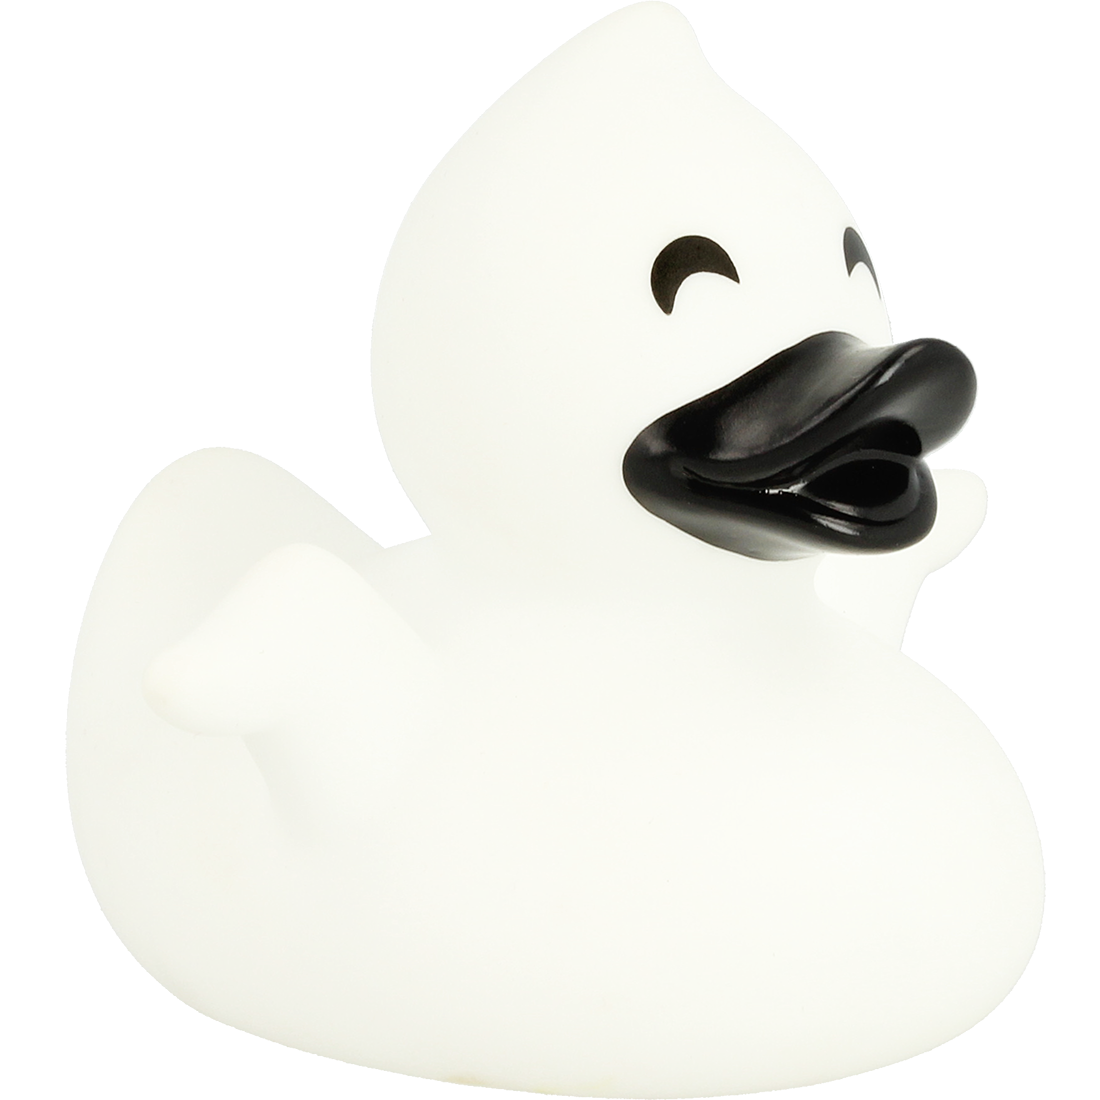 Ghost Duck.